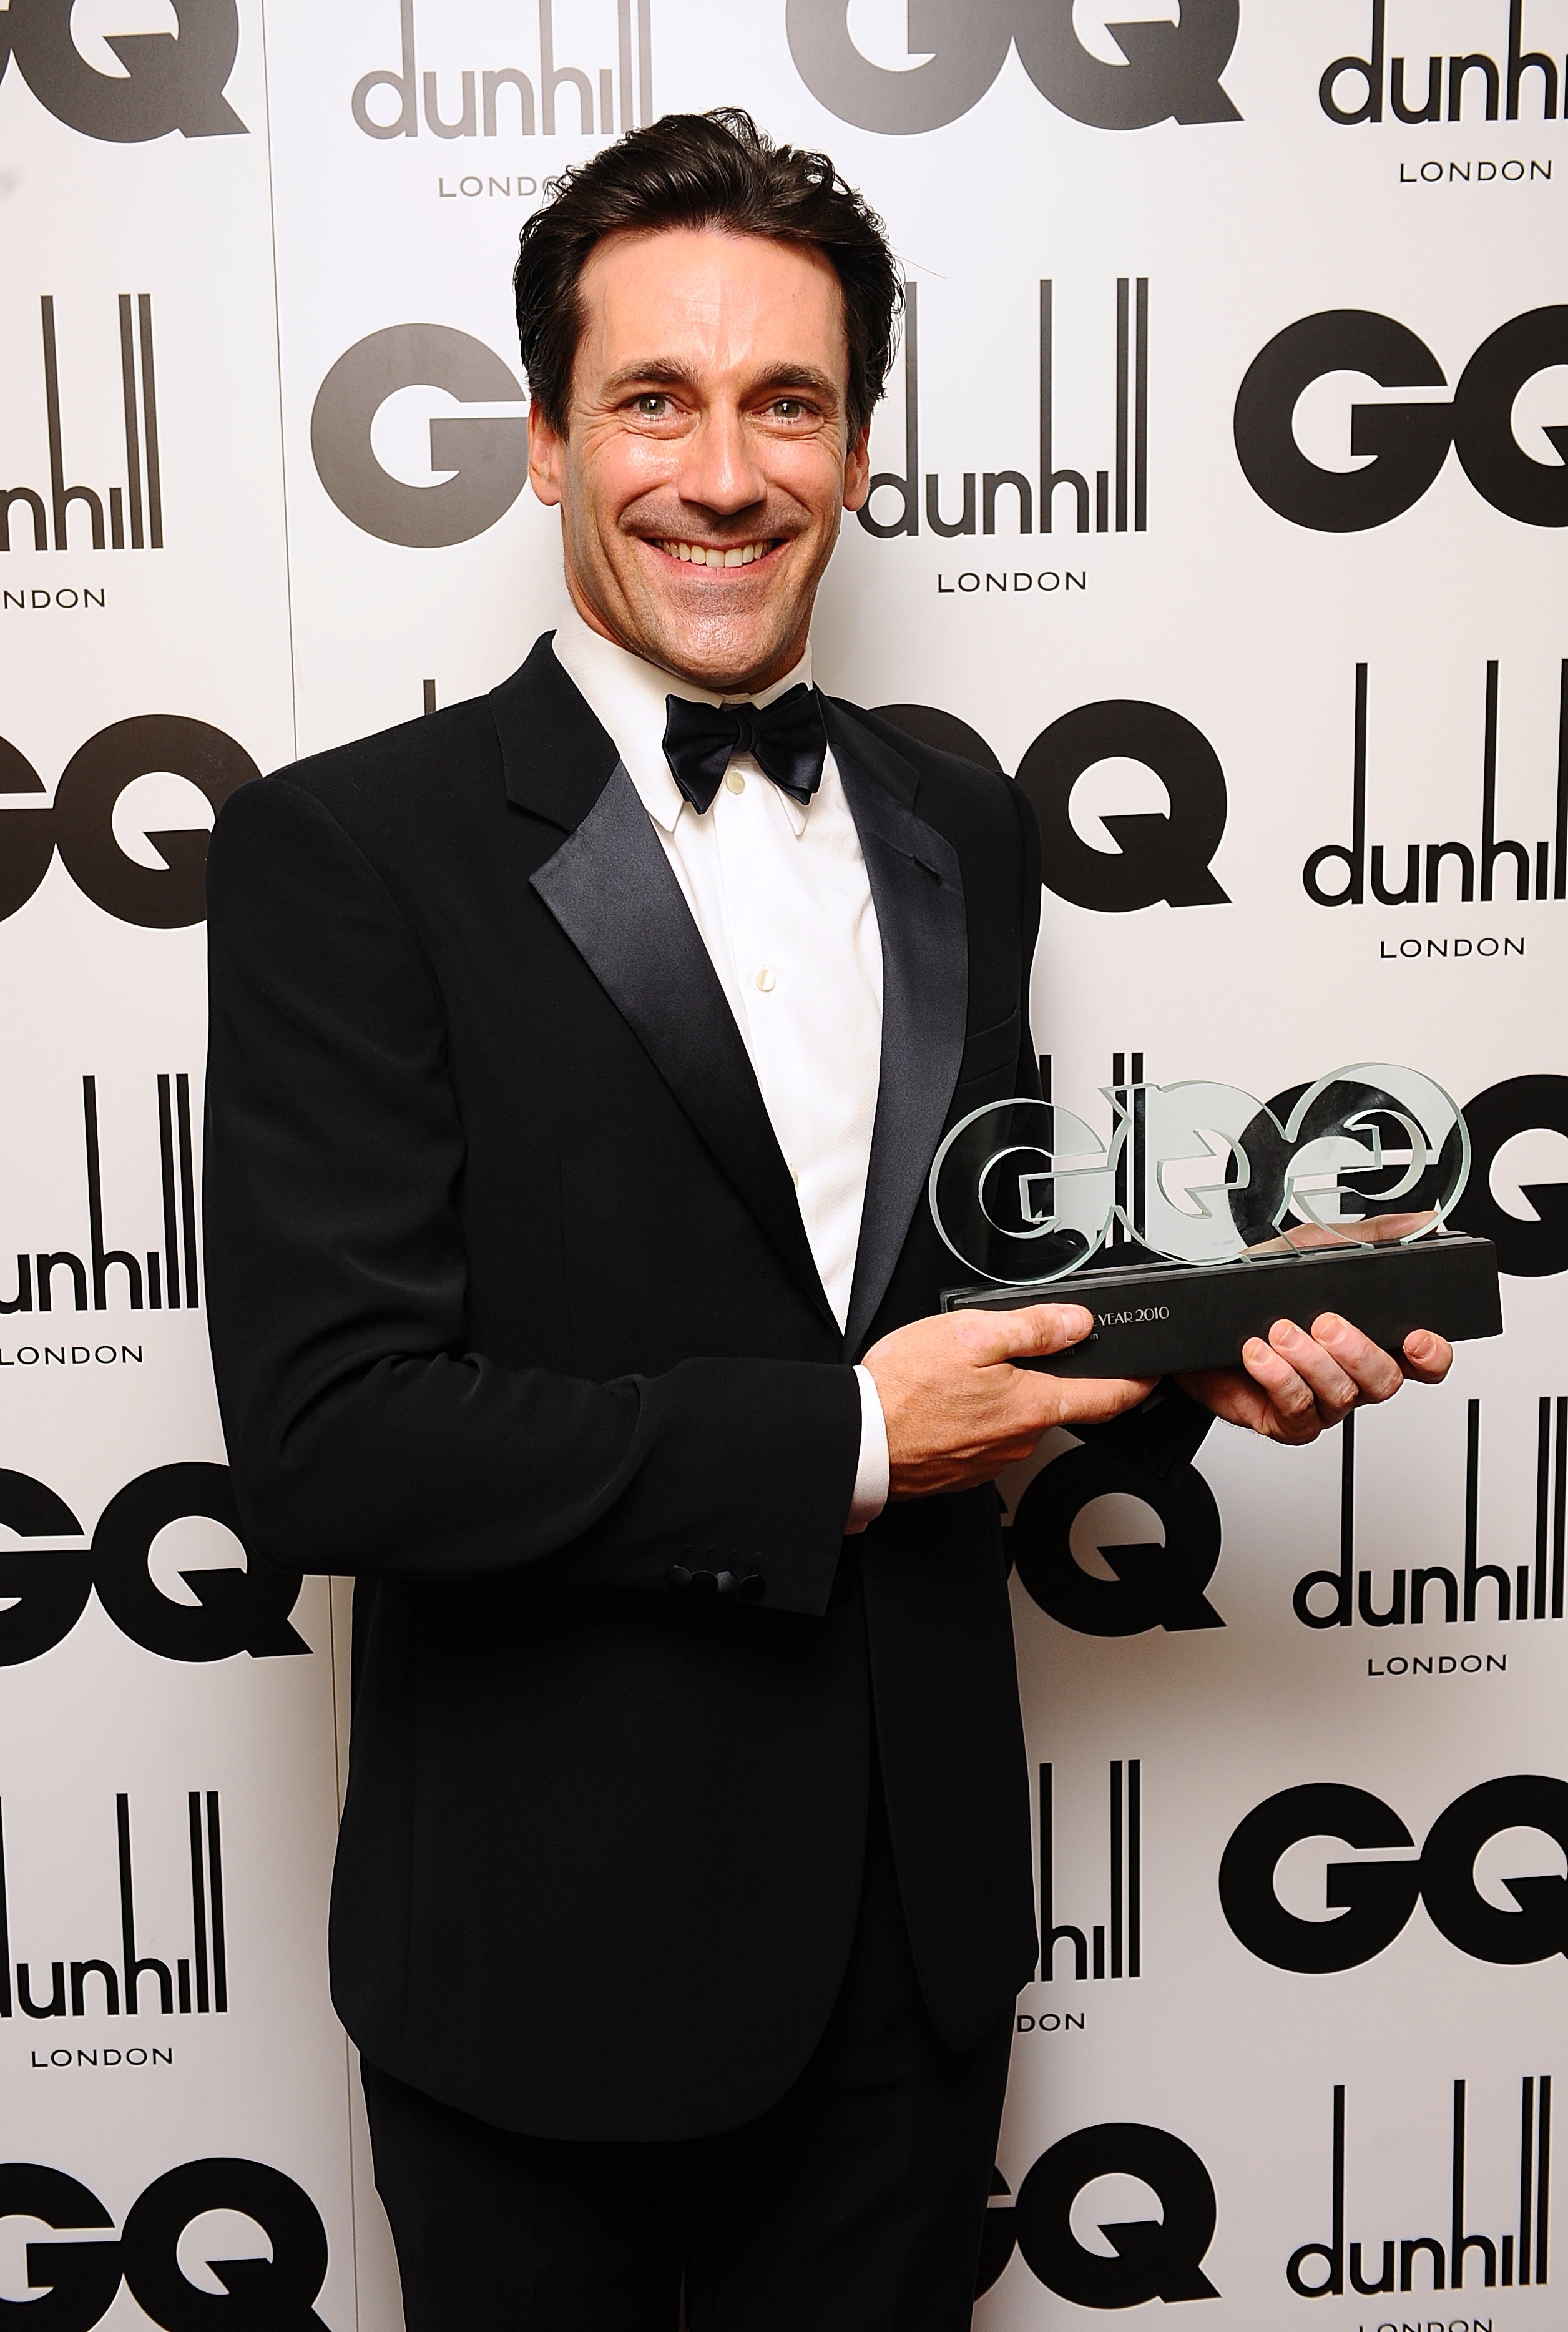 Jon Hamm with his Man of The Year Award, at the 2010 GQ Men of the Year Awards 2010